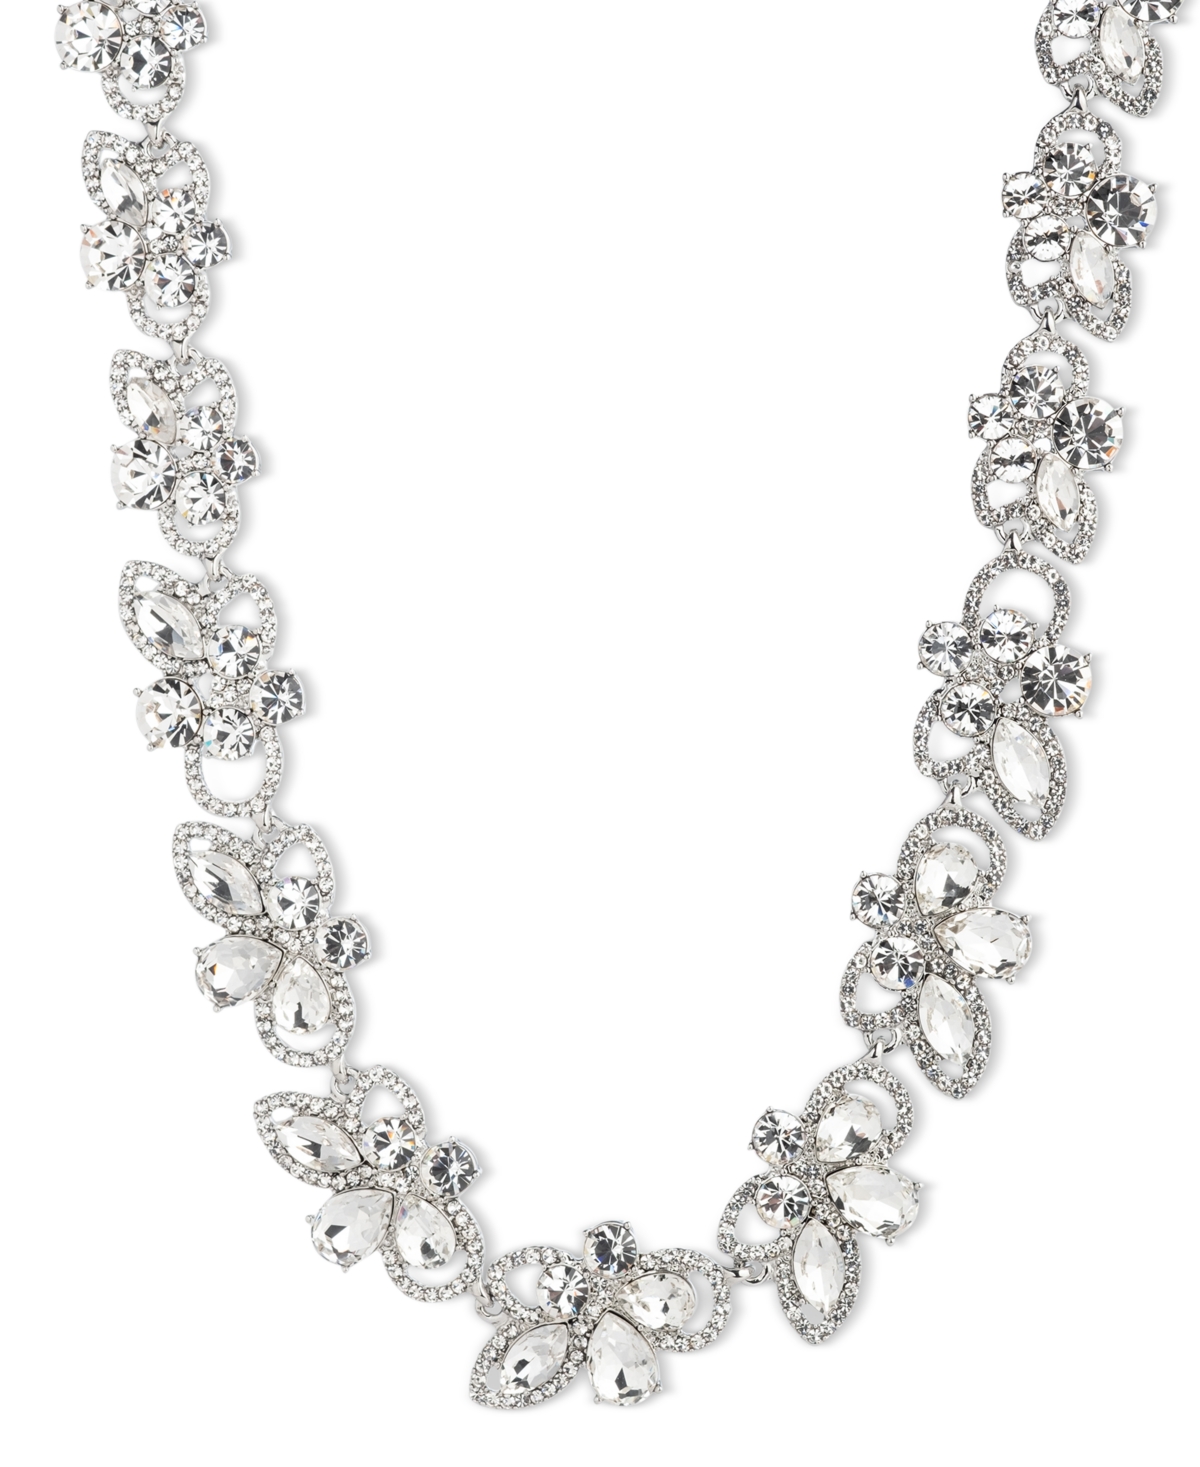 Silver-Tone Crystal Petal All-Around Collar Necklace, 16" + 3" extender - White